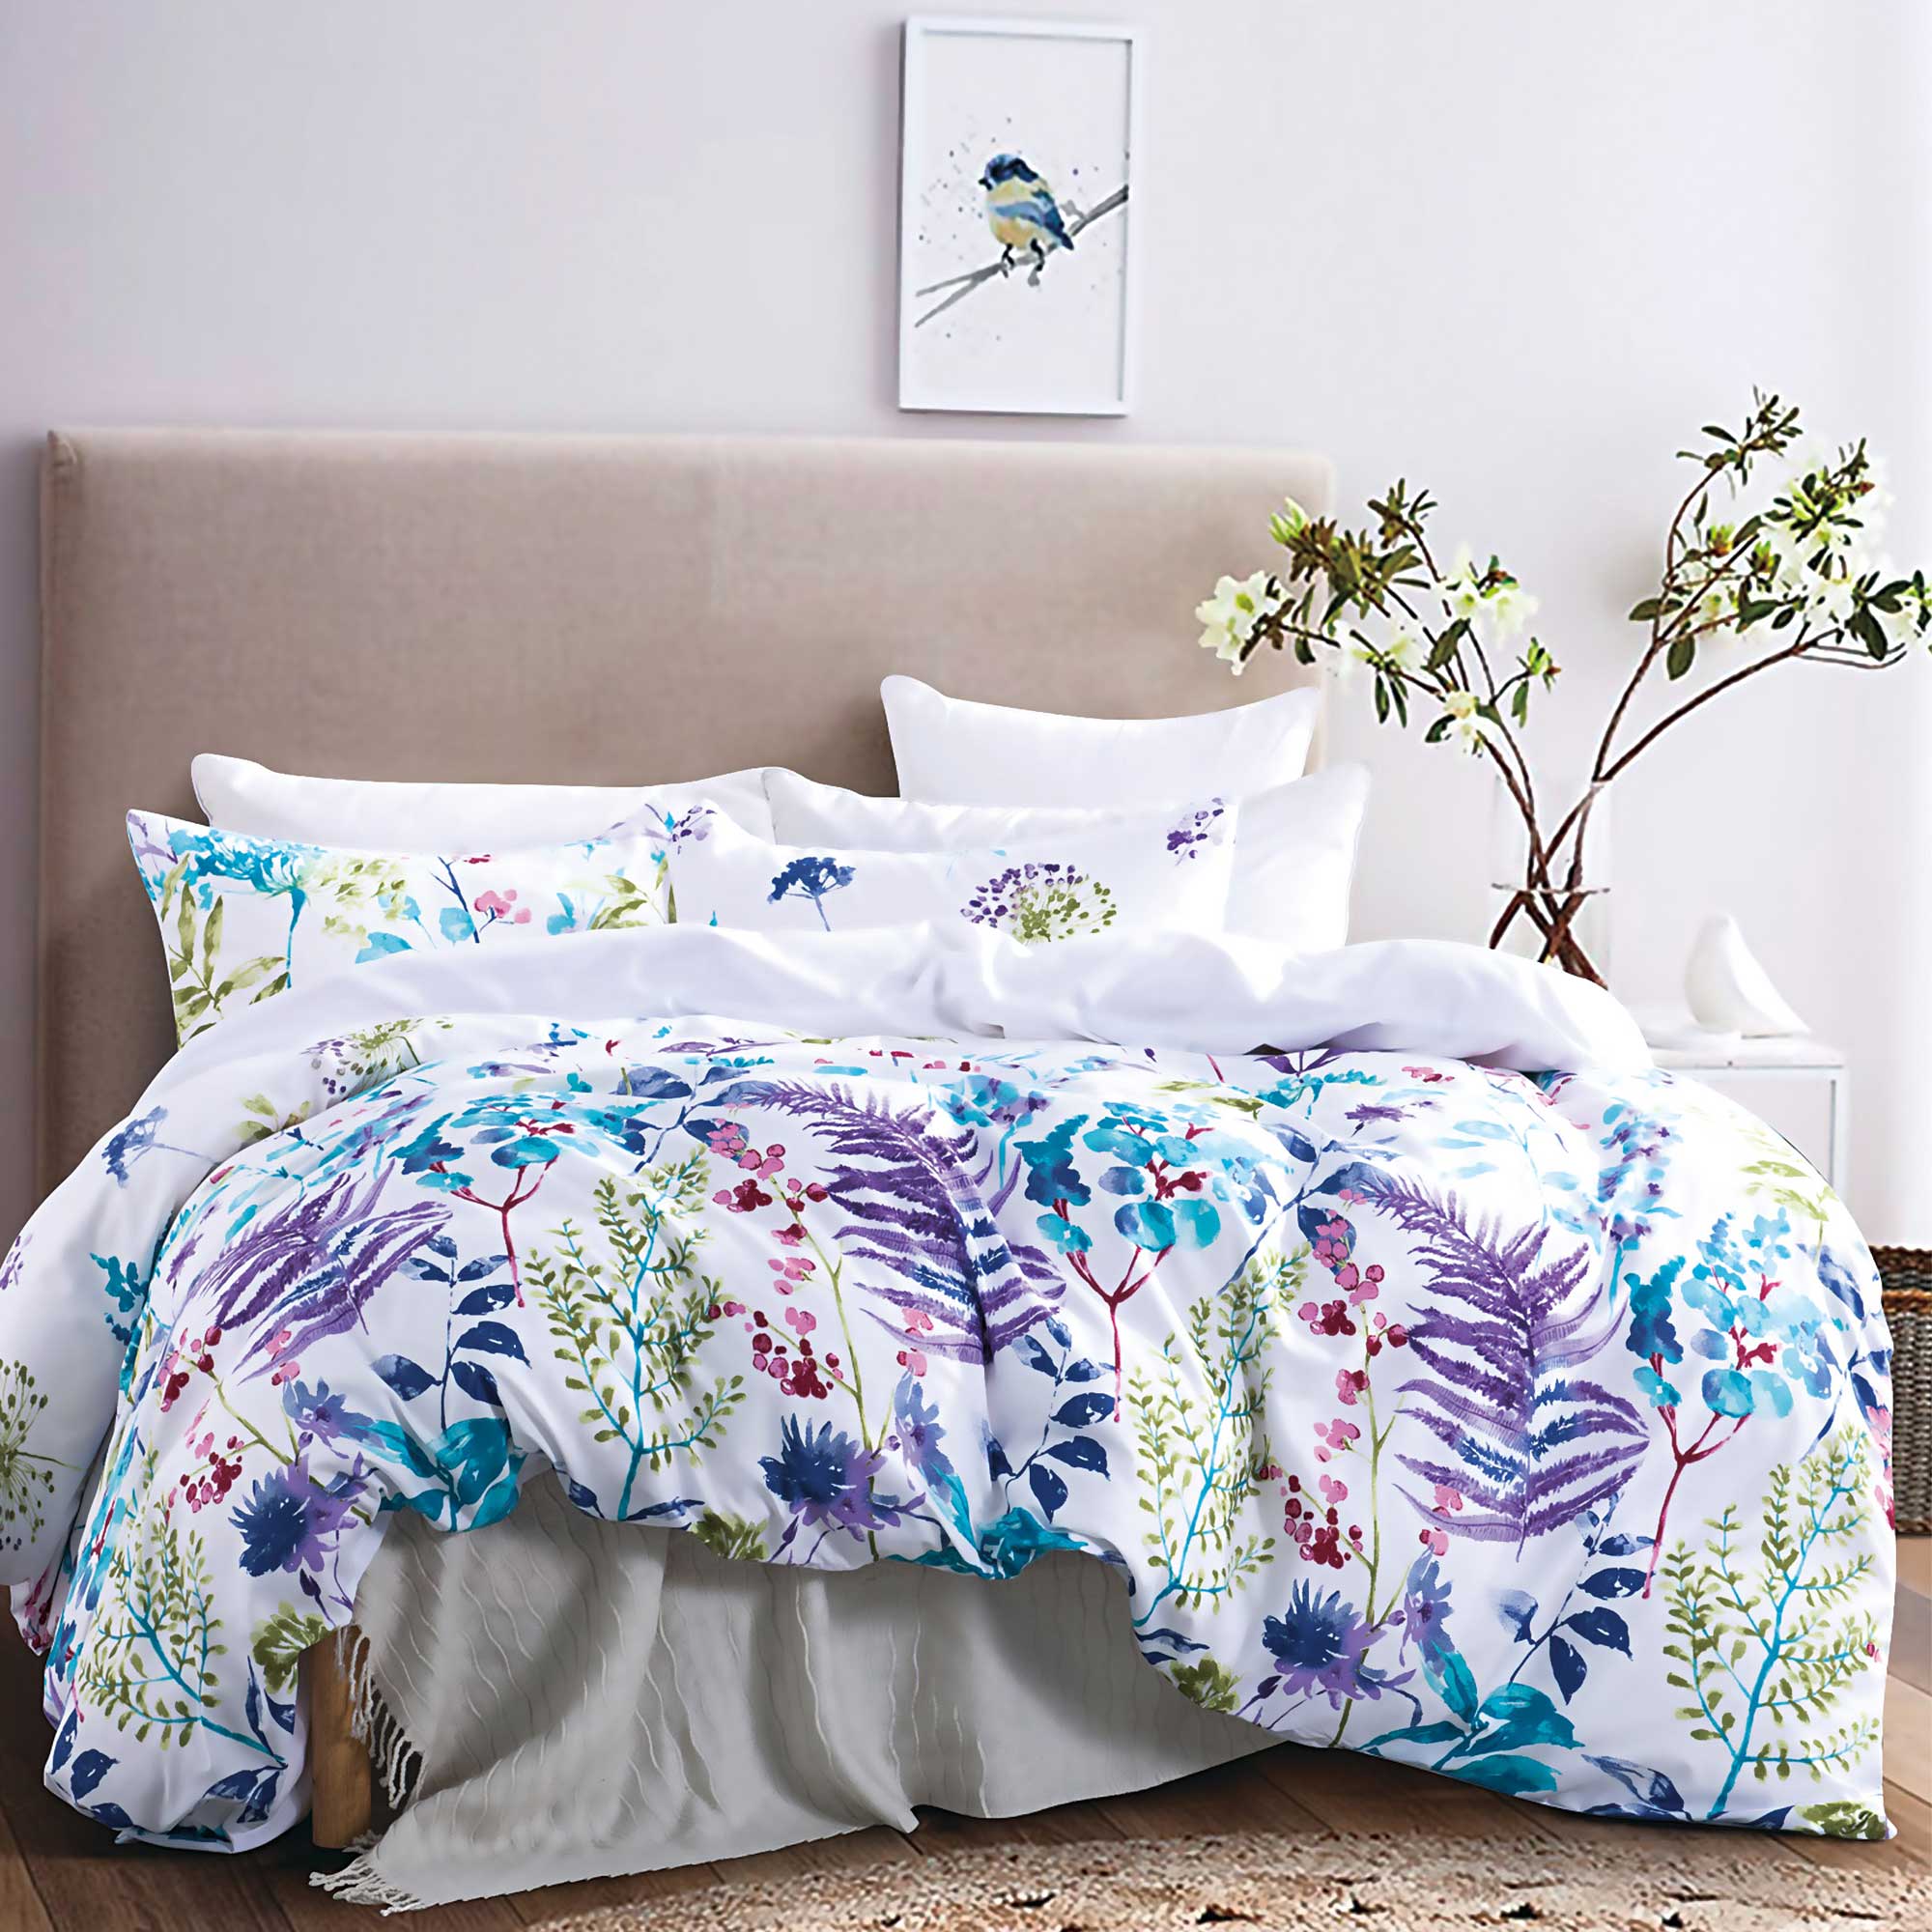 Turquoise Blue Purple Botanical Flower Leaf Quilt Cover Set /optionals( Queen / King / Super King / Double / Single / Extra Pillowcase options)